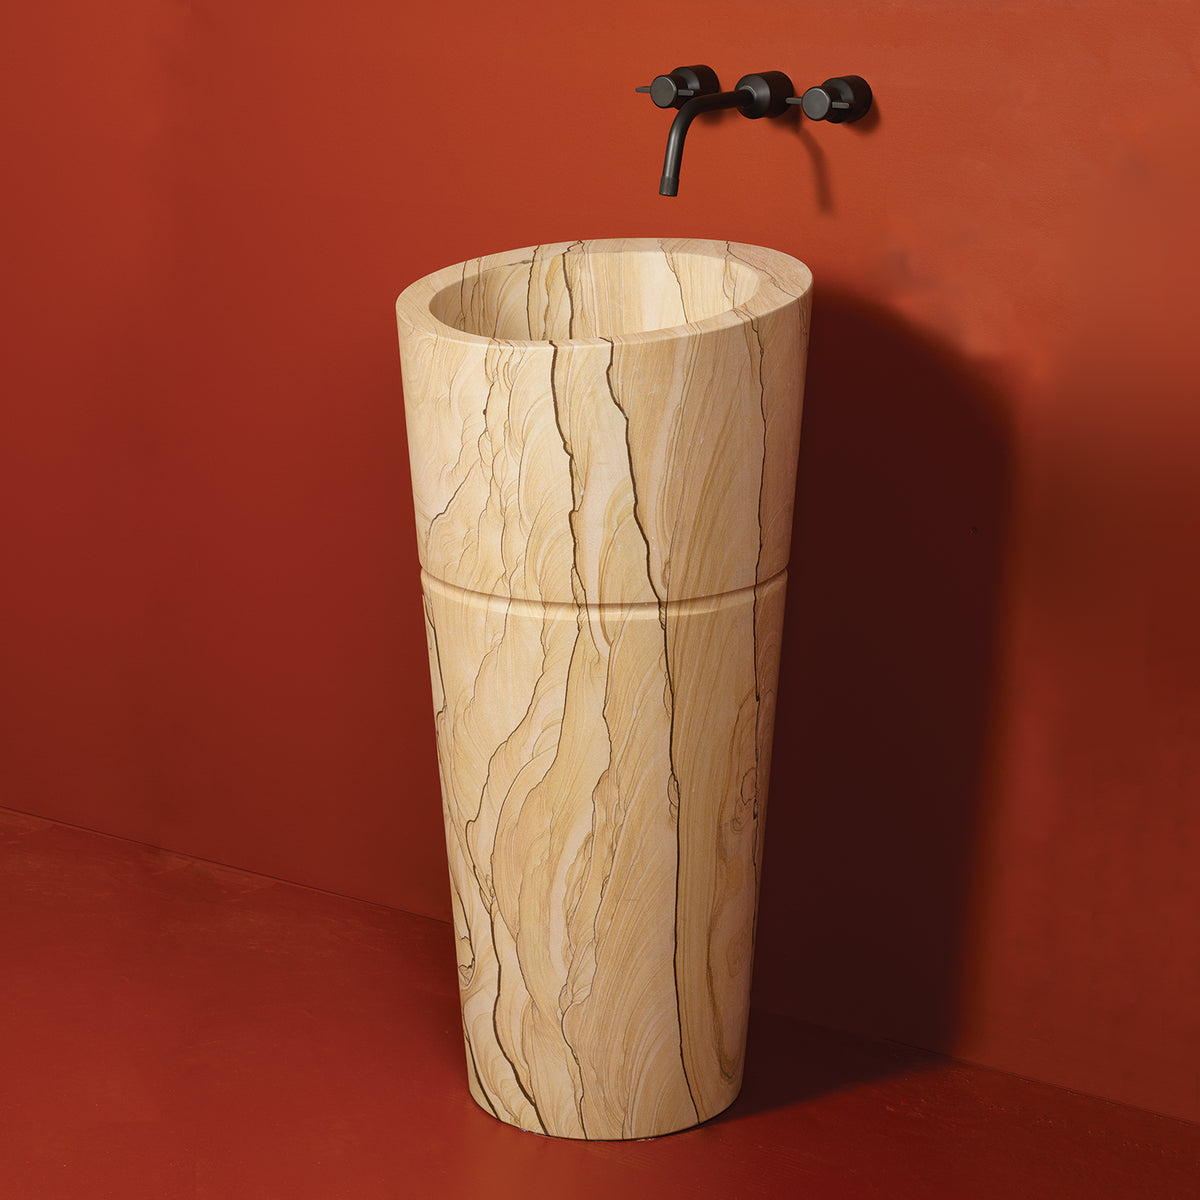 Stone Forest Veneto Pedestal Sink carved from a block of sandstone with a polished finish. image 1 of 7